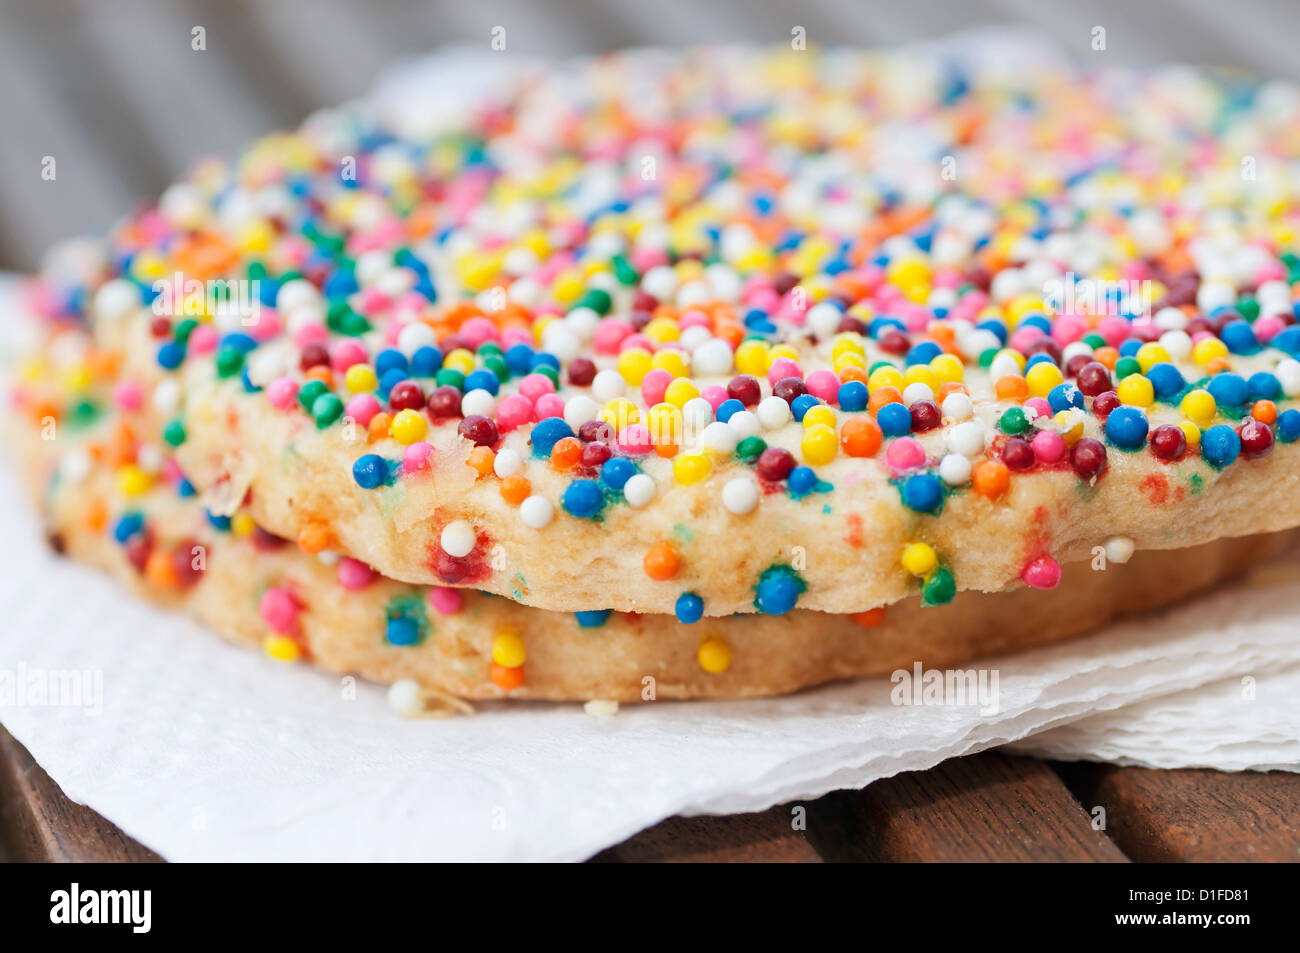 Closeup of two Mexican sugar cookies decorated with colorful candy sprinkles. Stock Photo